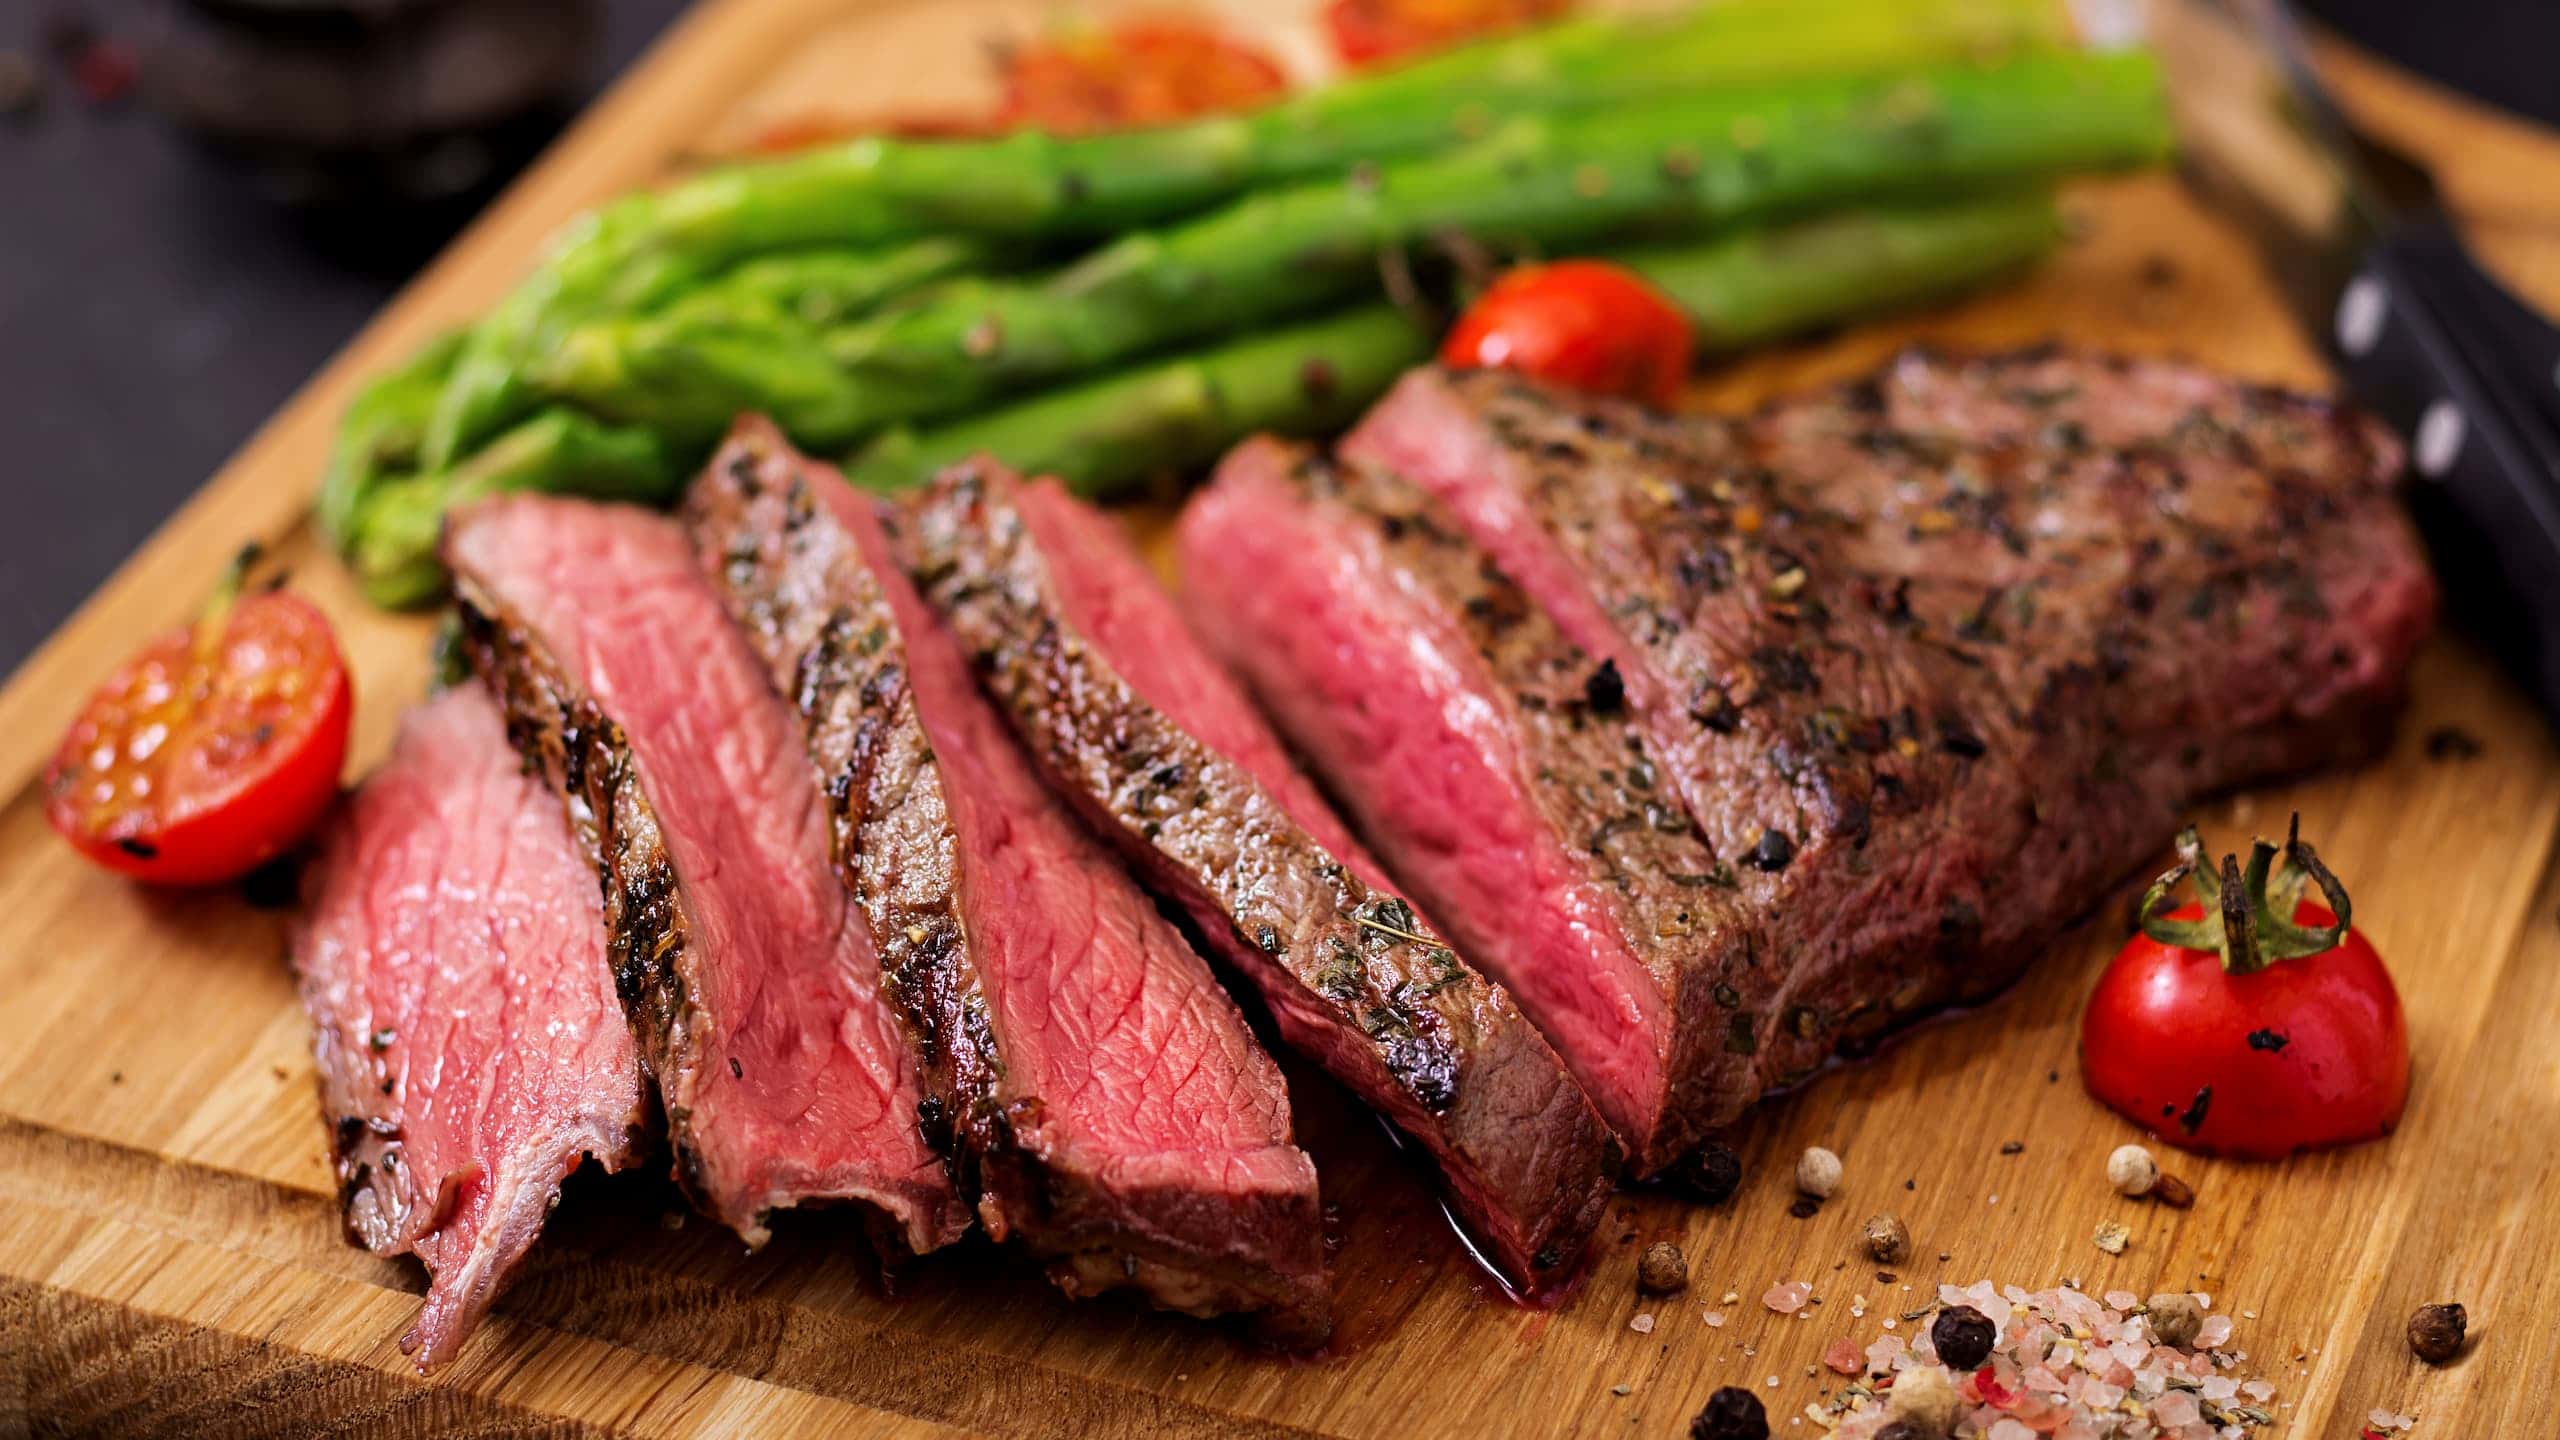 Juicy Pioneer Woman London Broil with spices, garnish, and asparagus